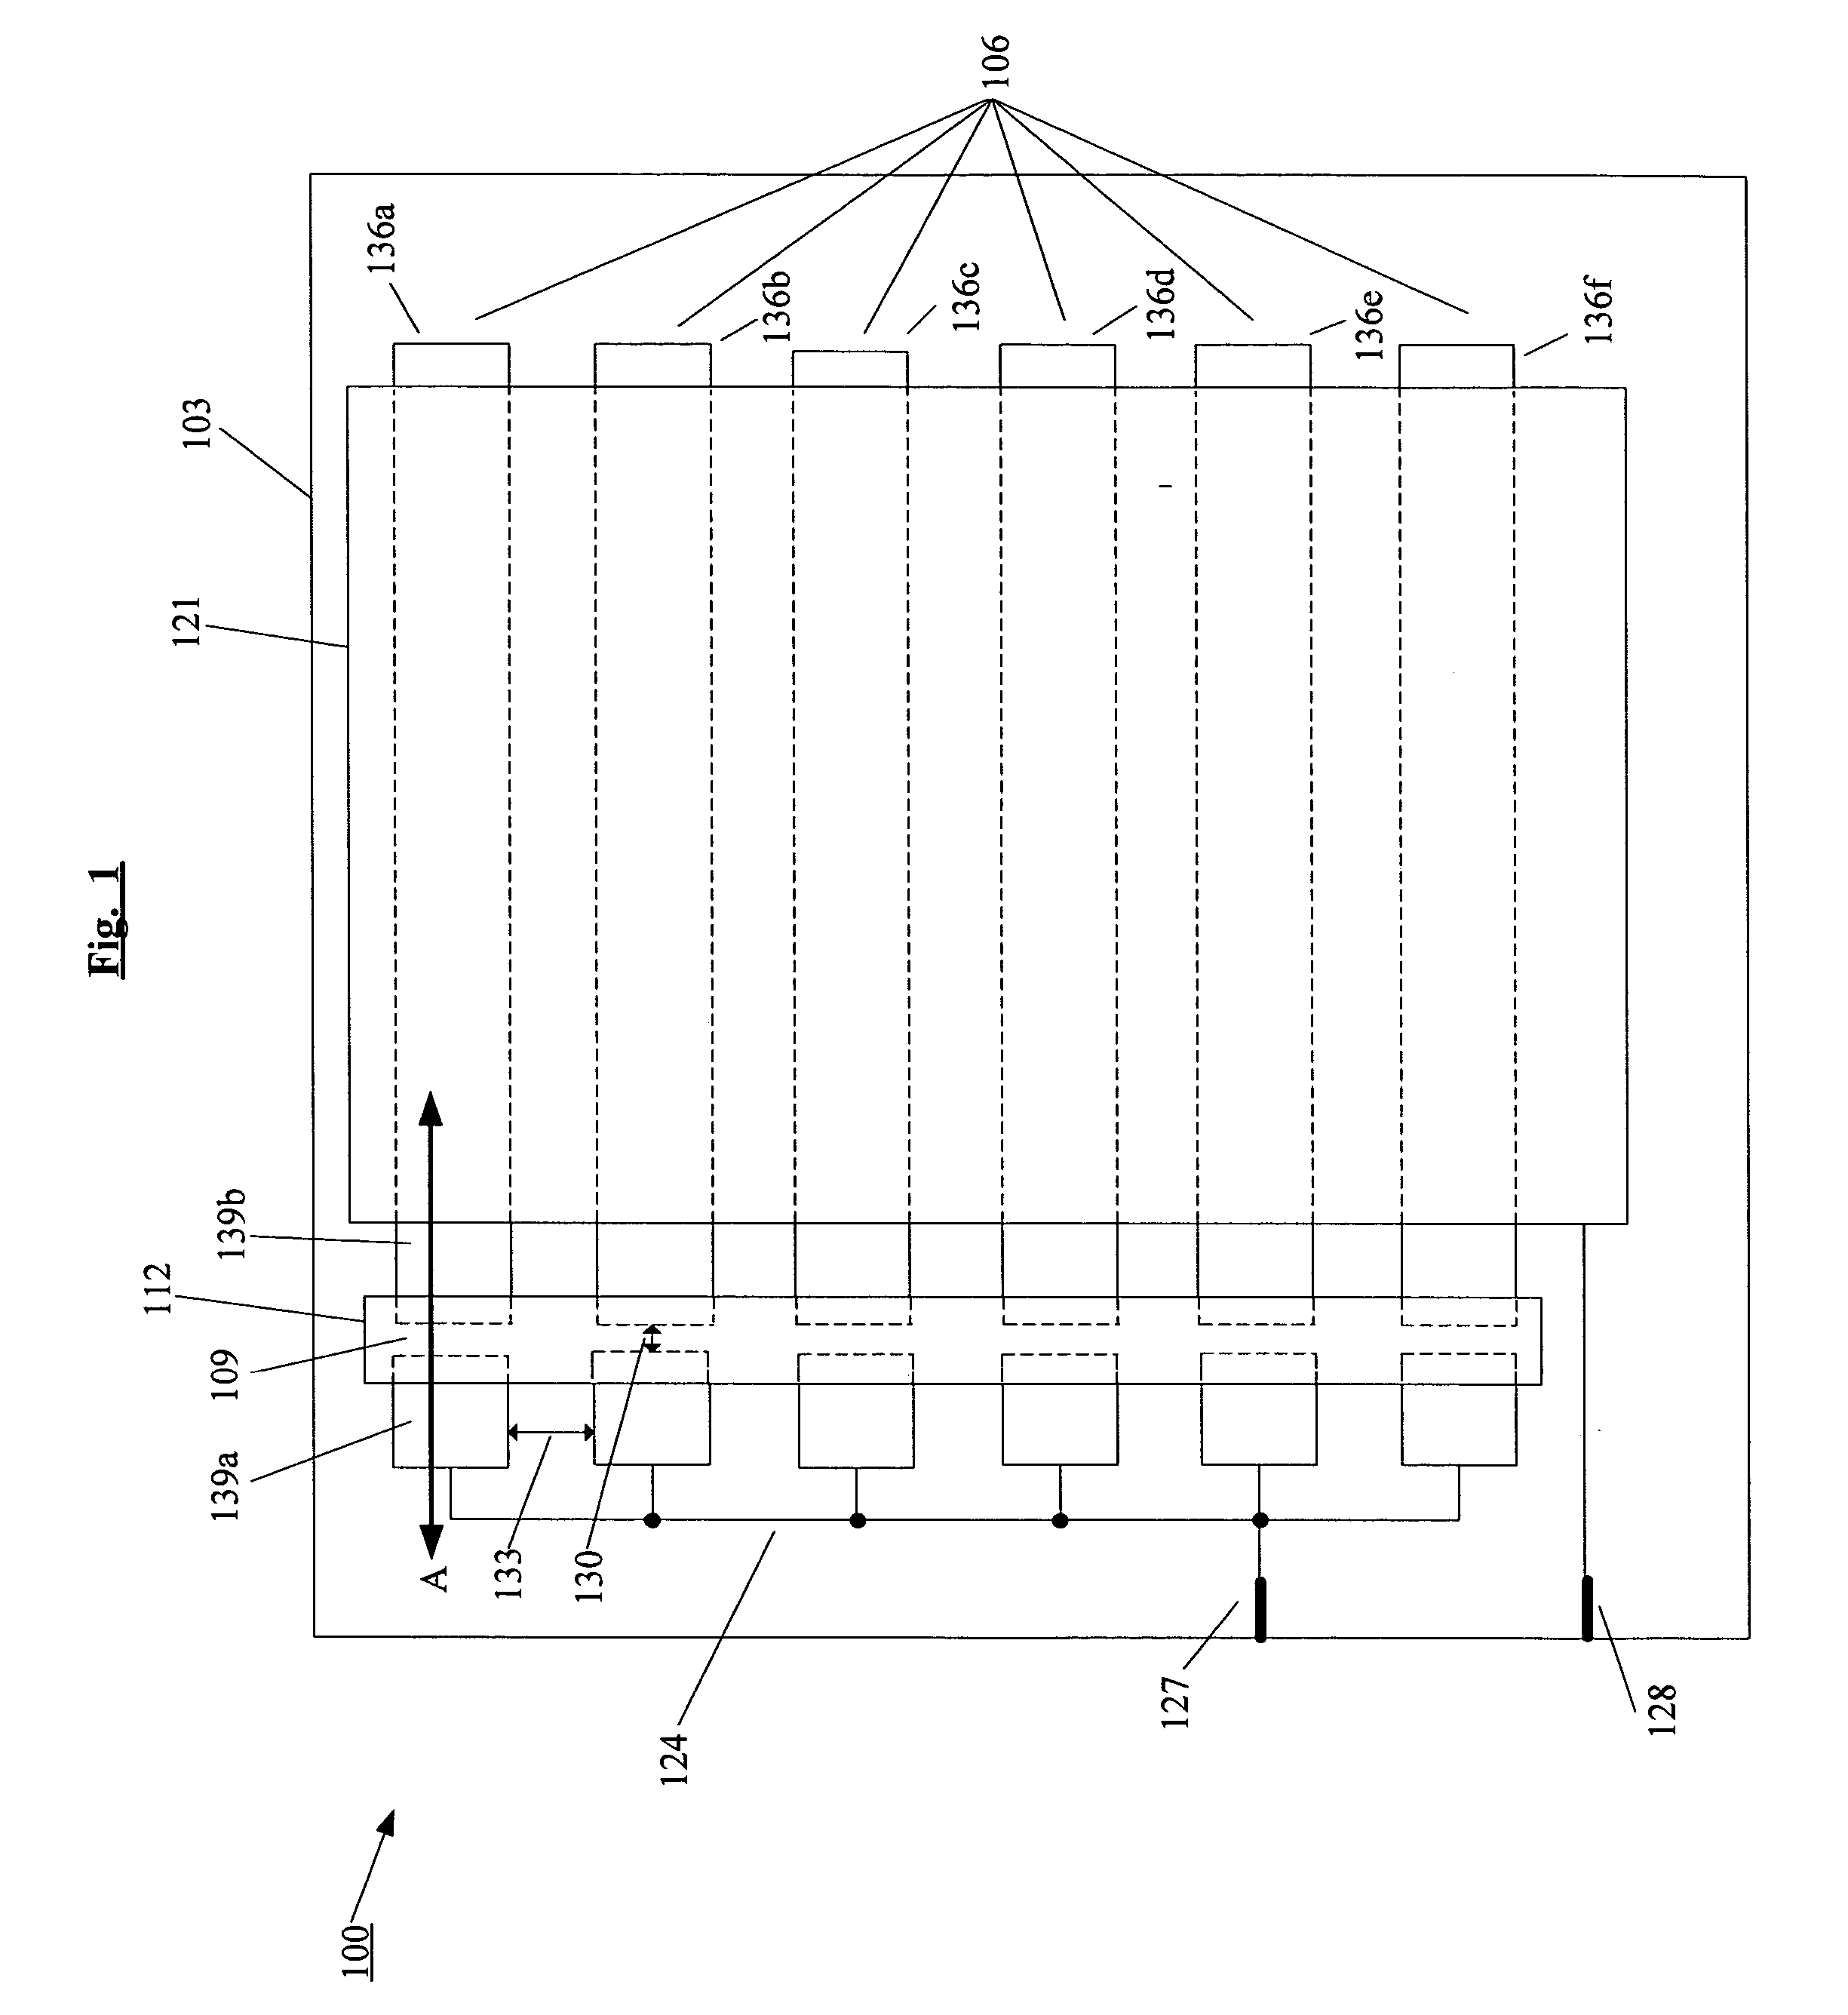 Integrated fuses for OLED lighting device